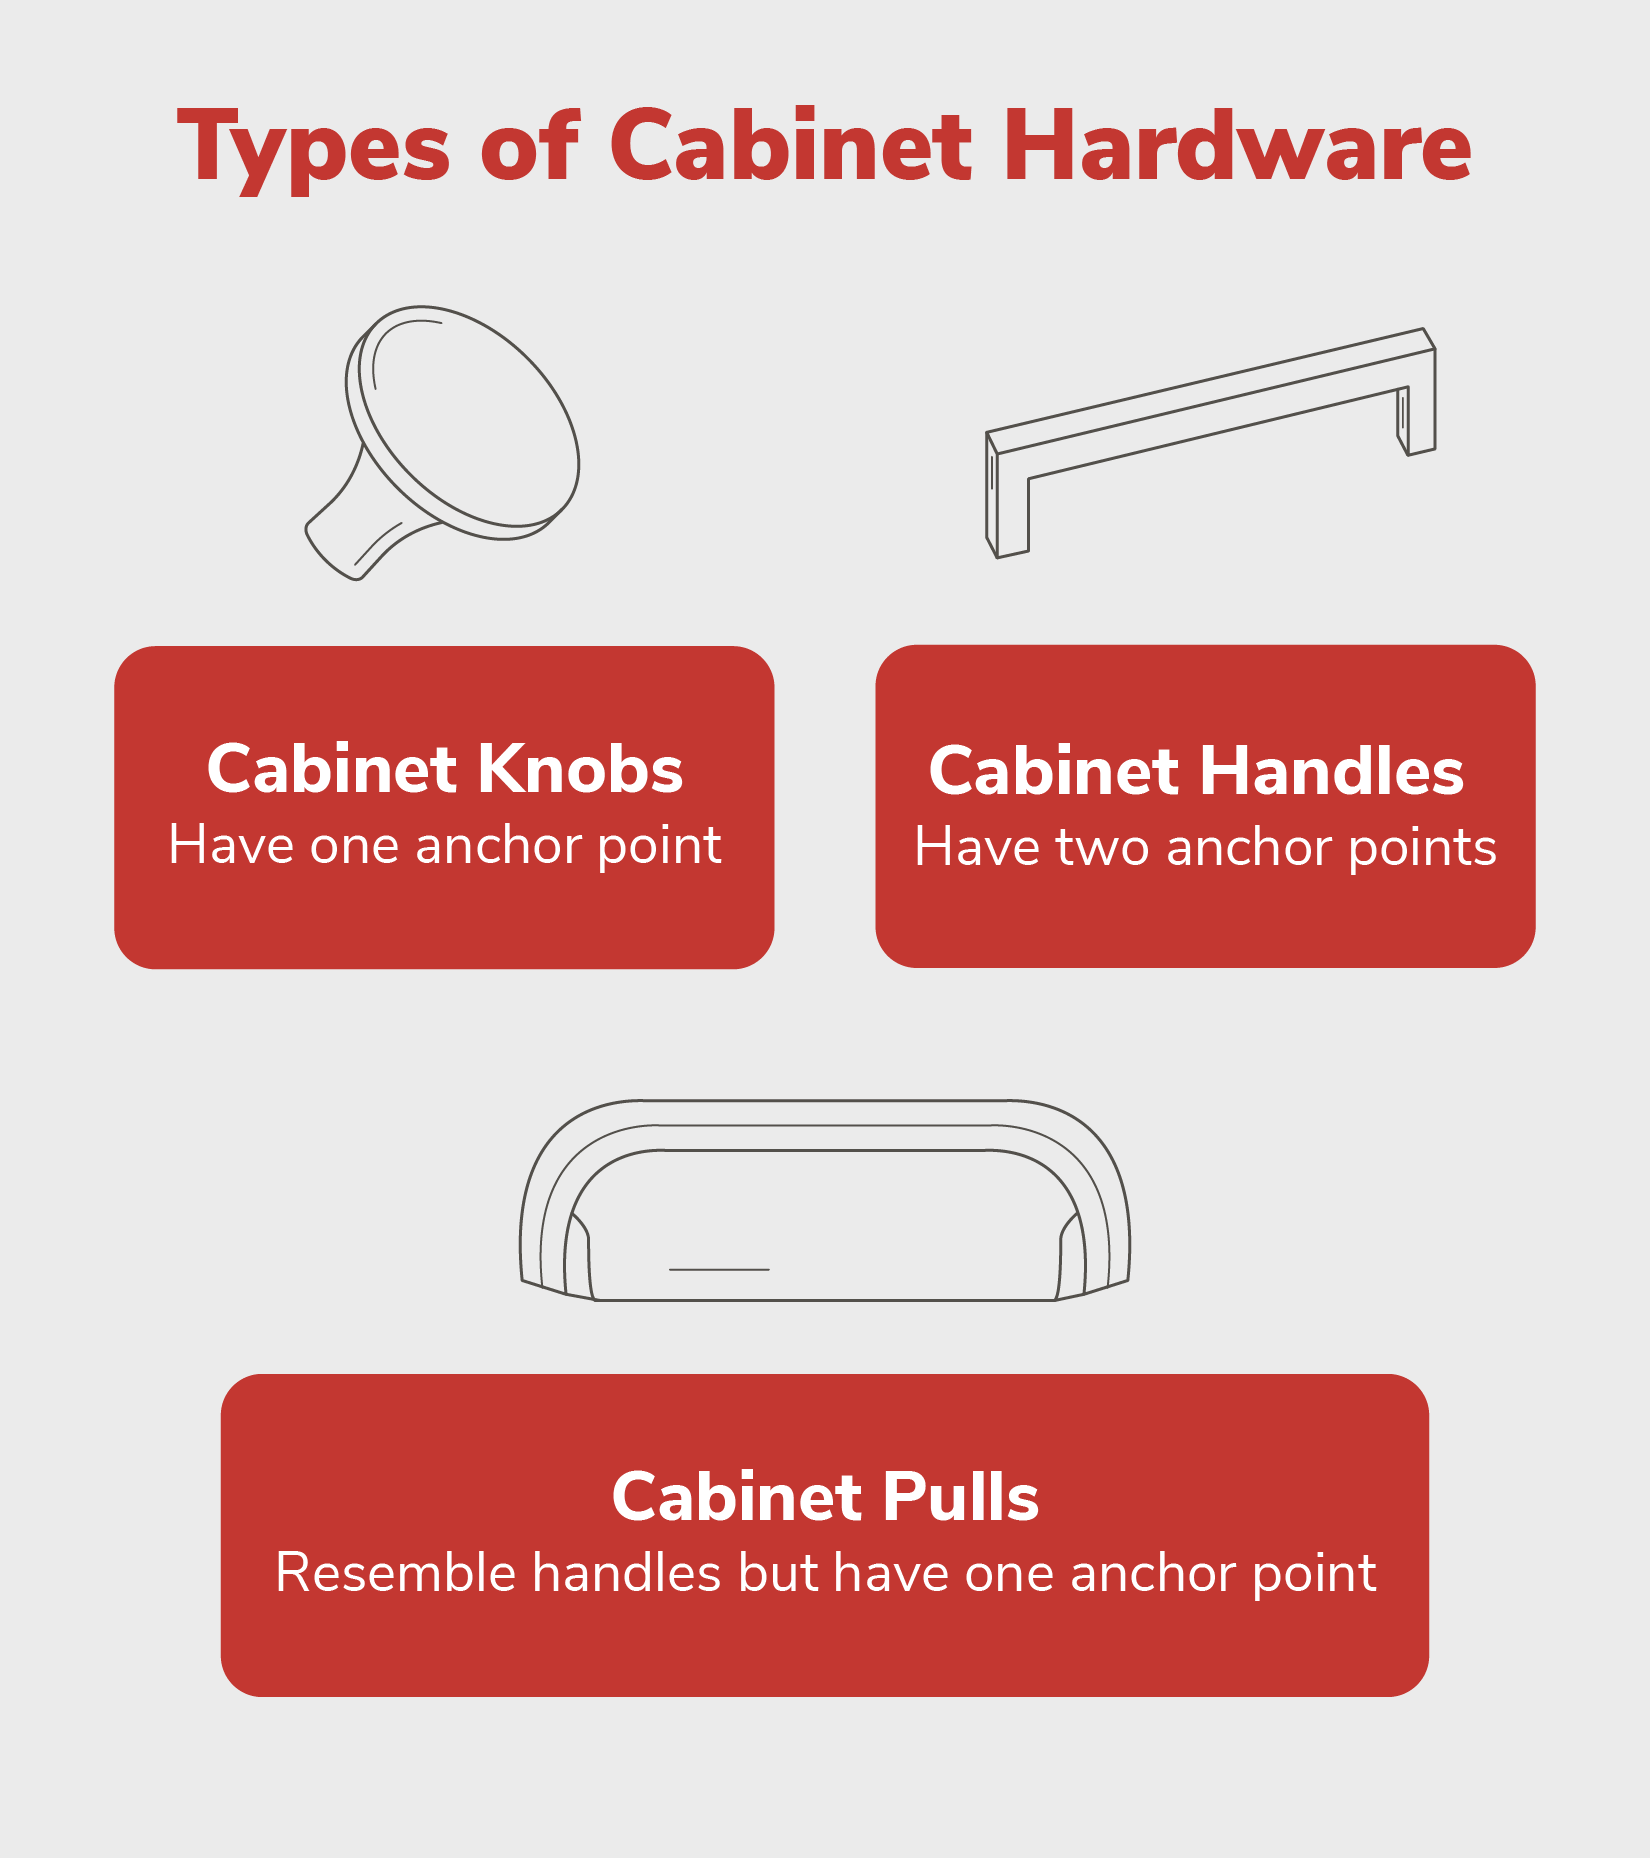 Image describing the difference between cabinet knobs, handles, and pulls.